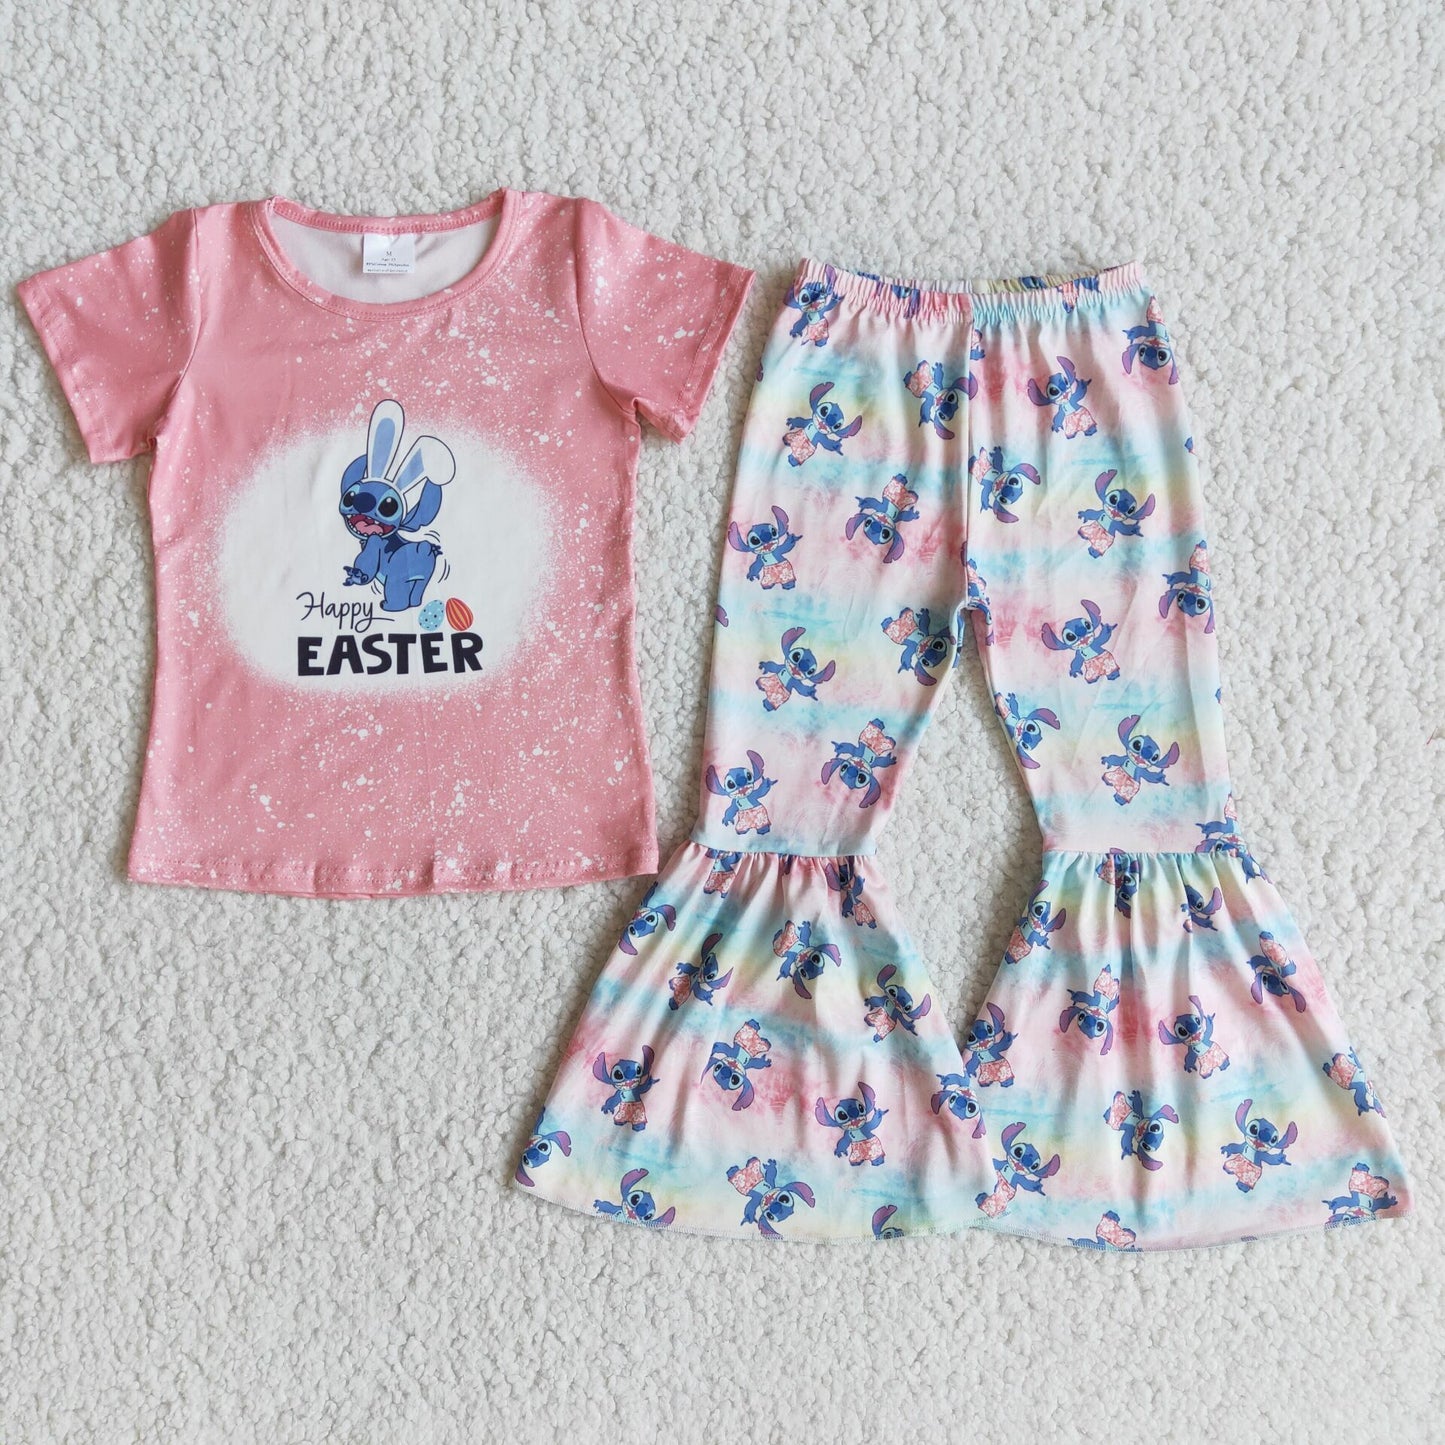 Easter Truck Girl's Short Sleeve Outfits